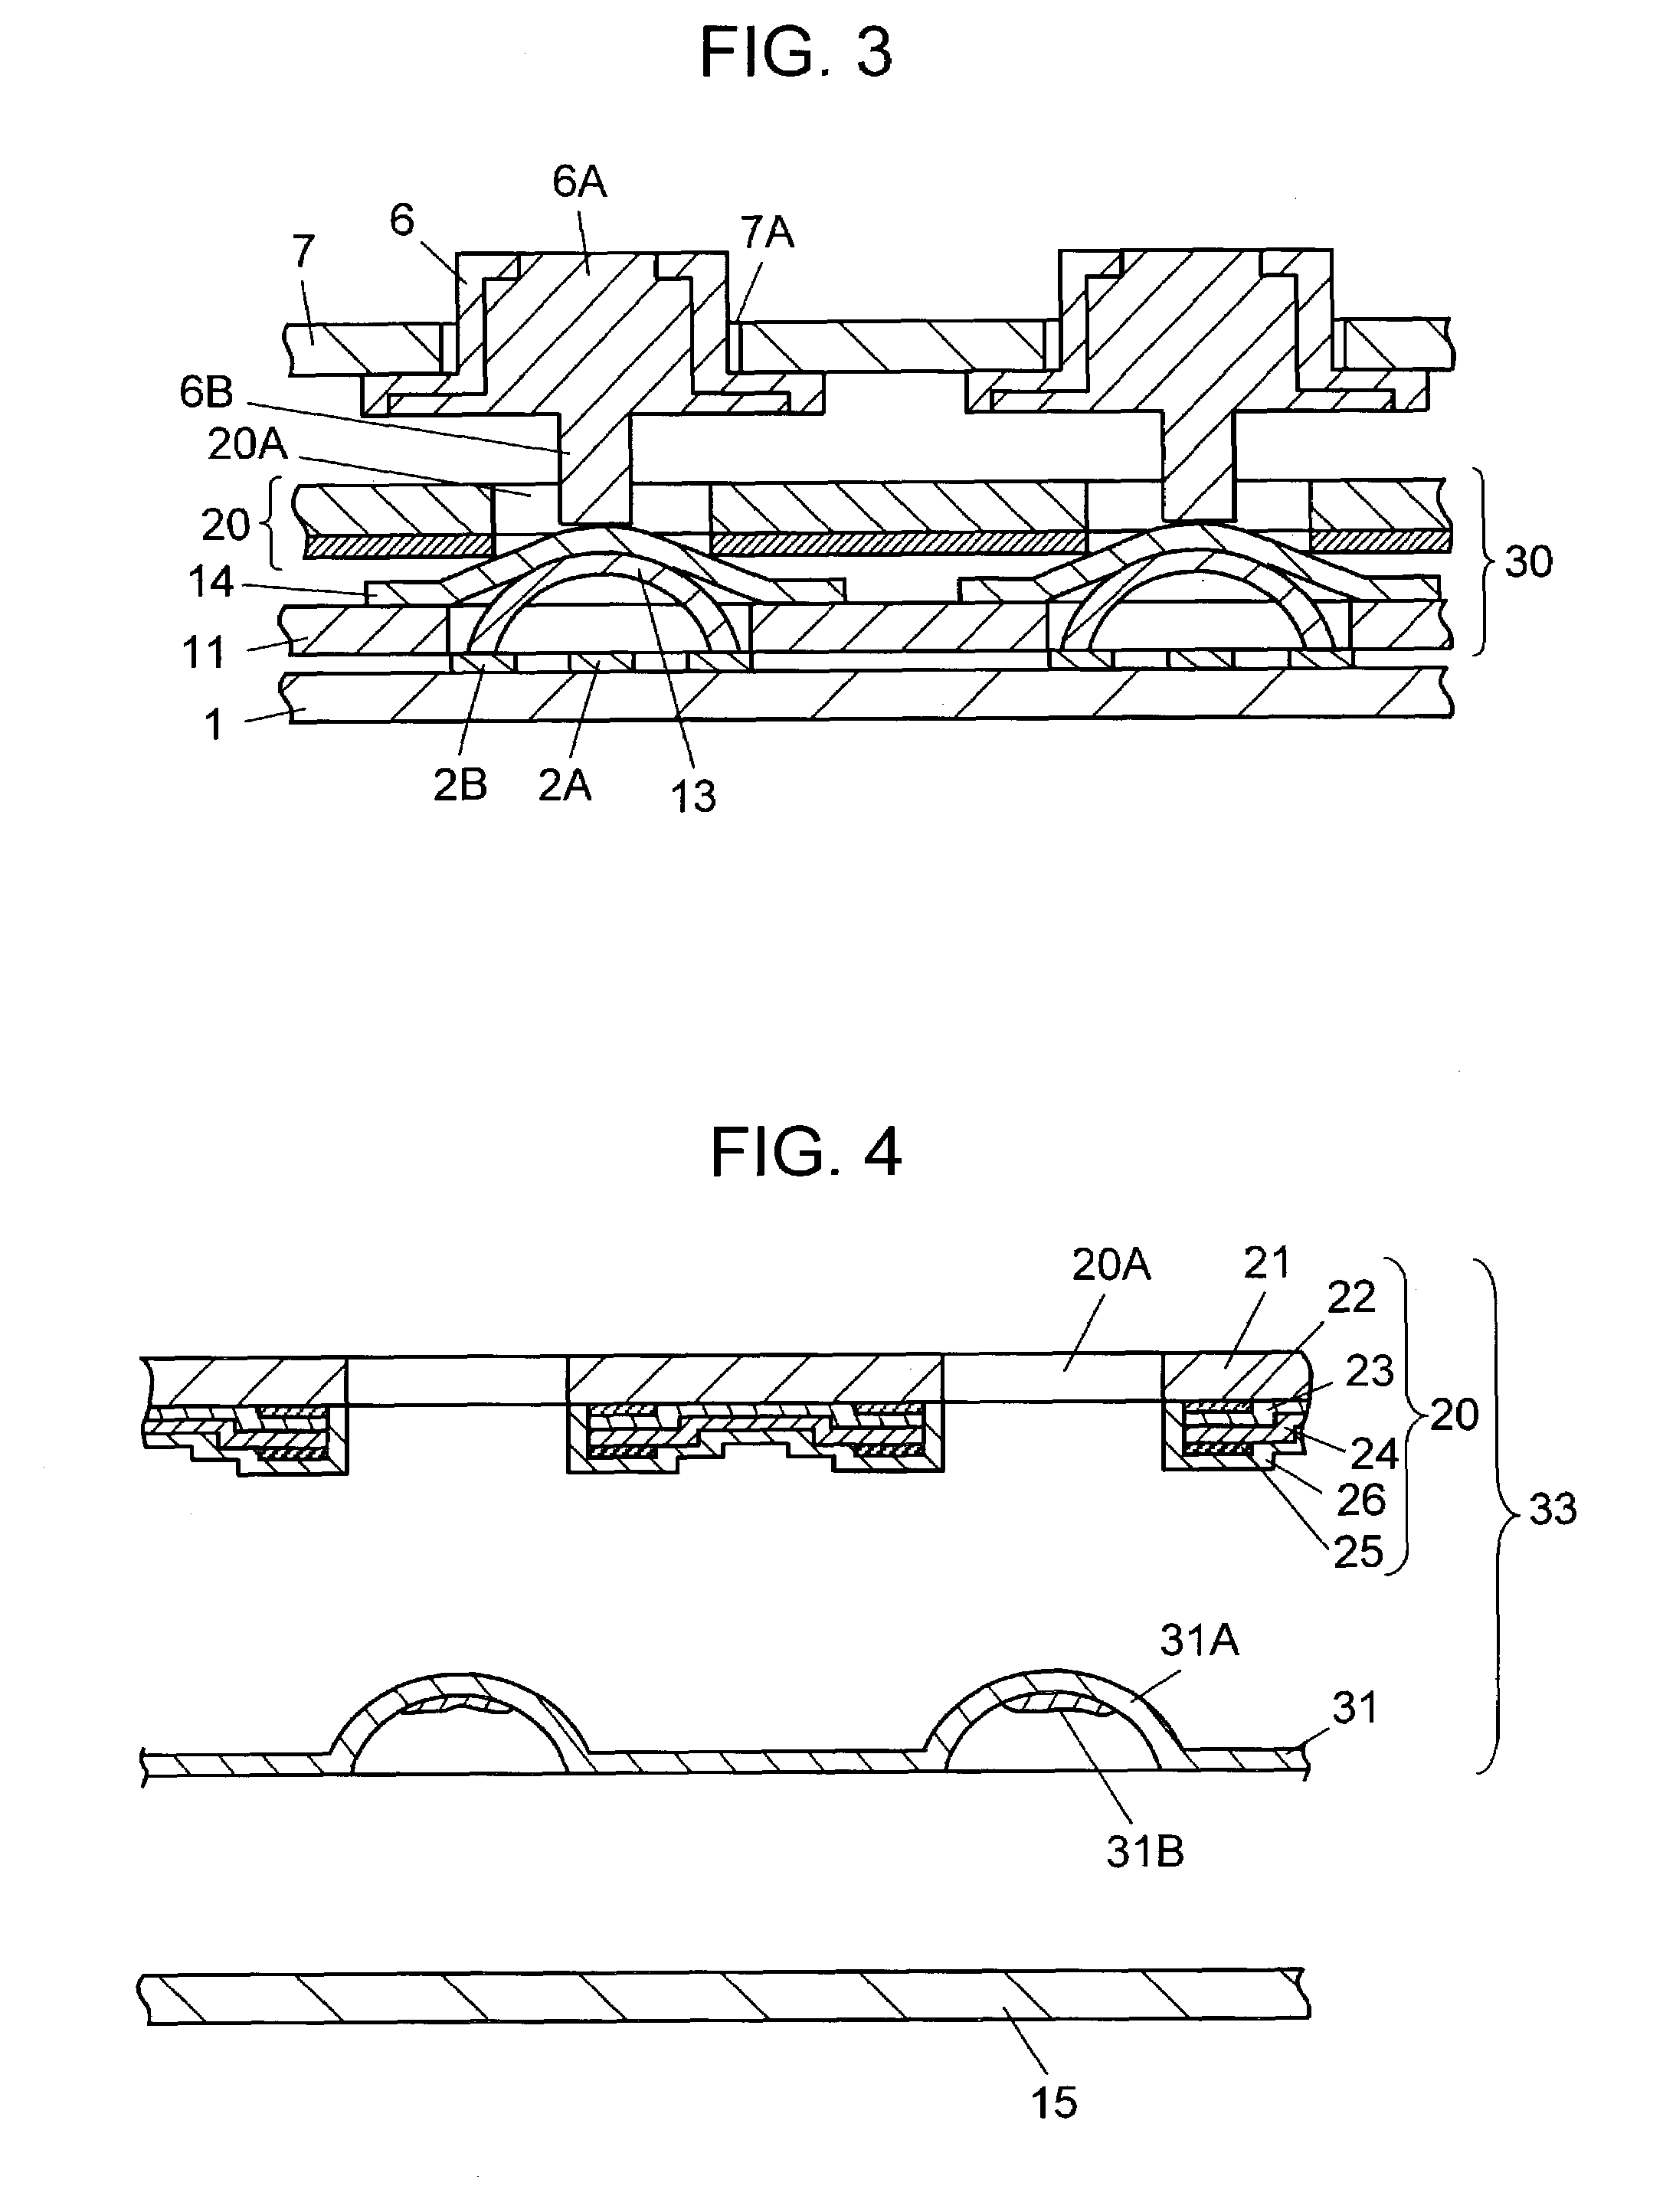 Lighted switch sheet and lighted switch unit using the same